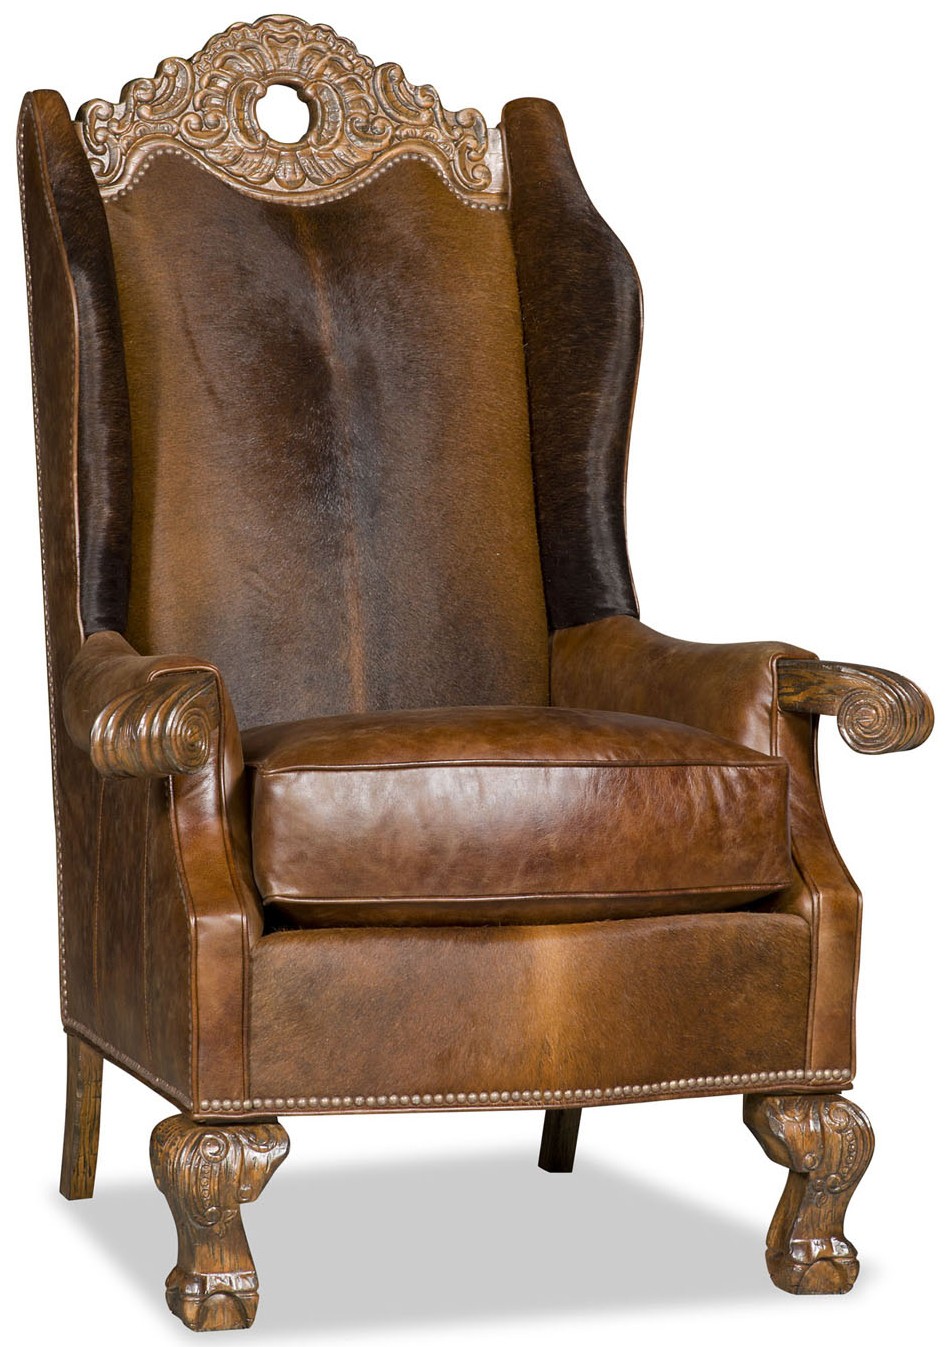 CHAIRS - Leather, Upholstered, Accent Leather armchair with unique wooden detailing